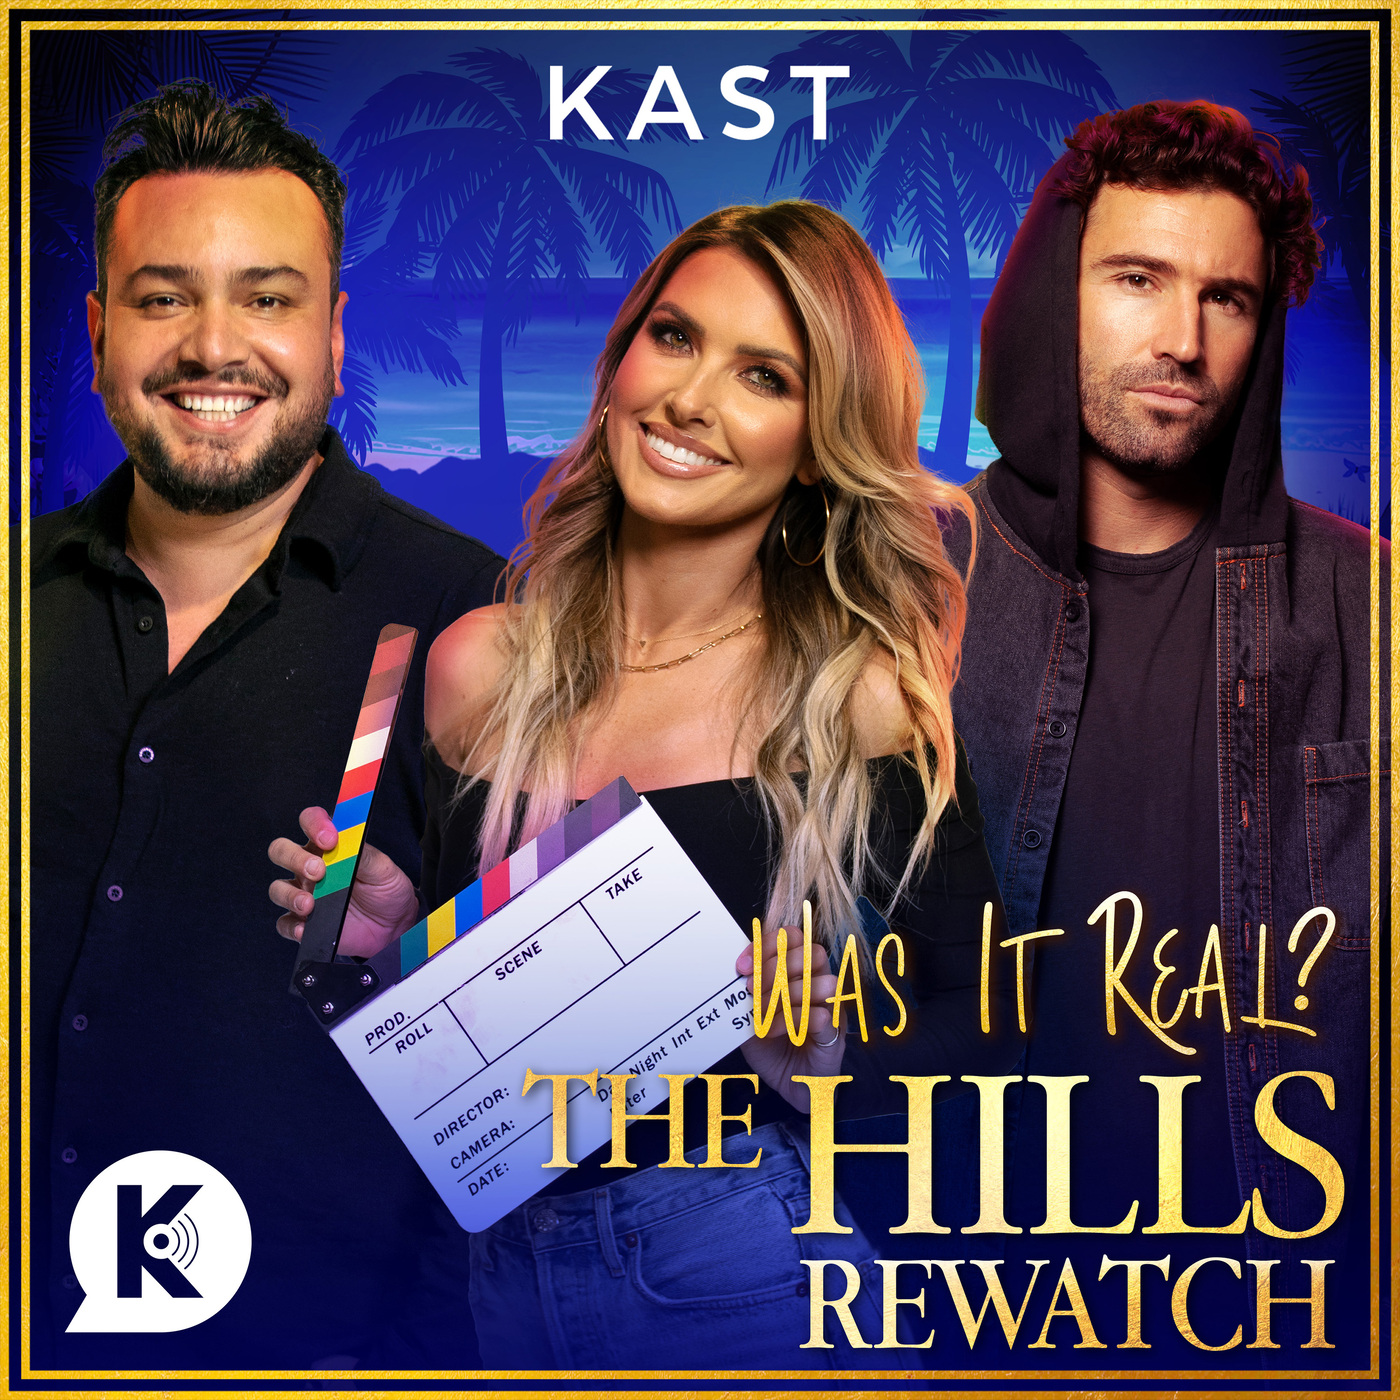 Everyone Falls | Was it Real? The Hills Rewatch Podcast